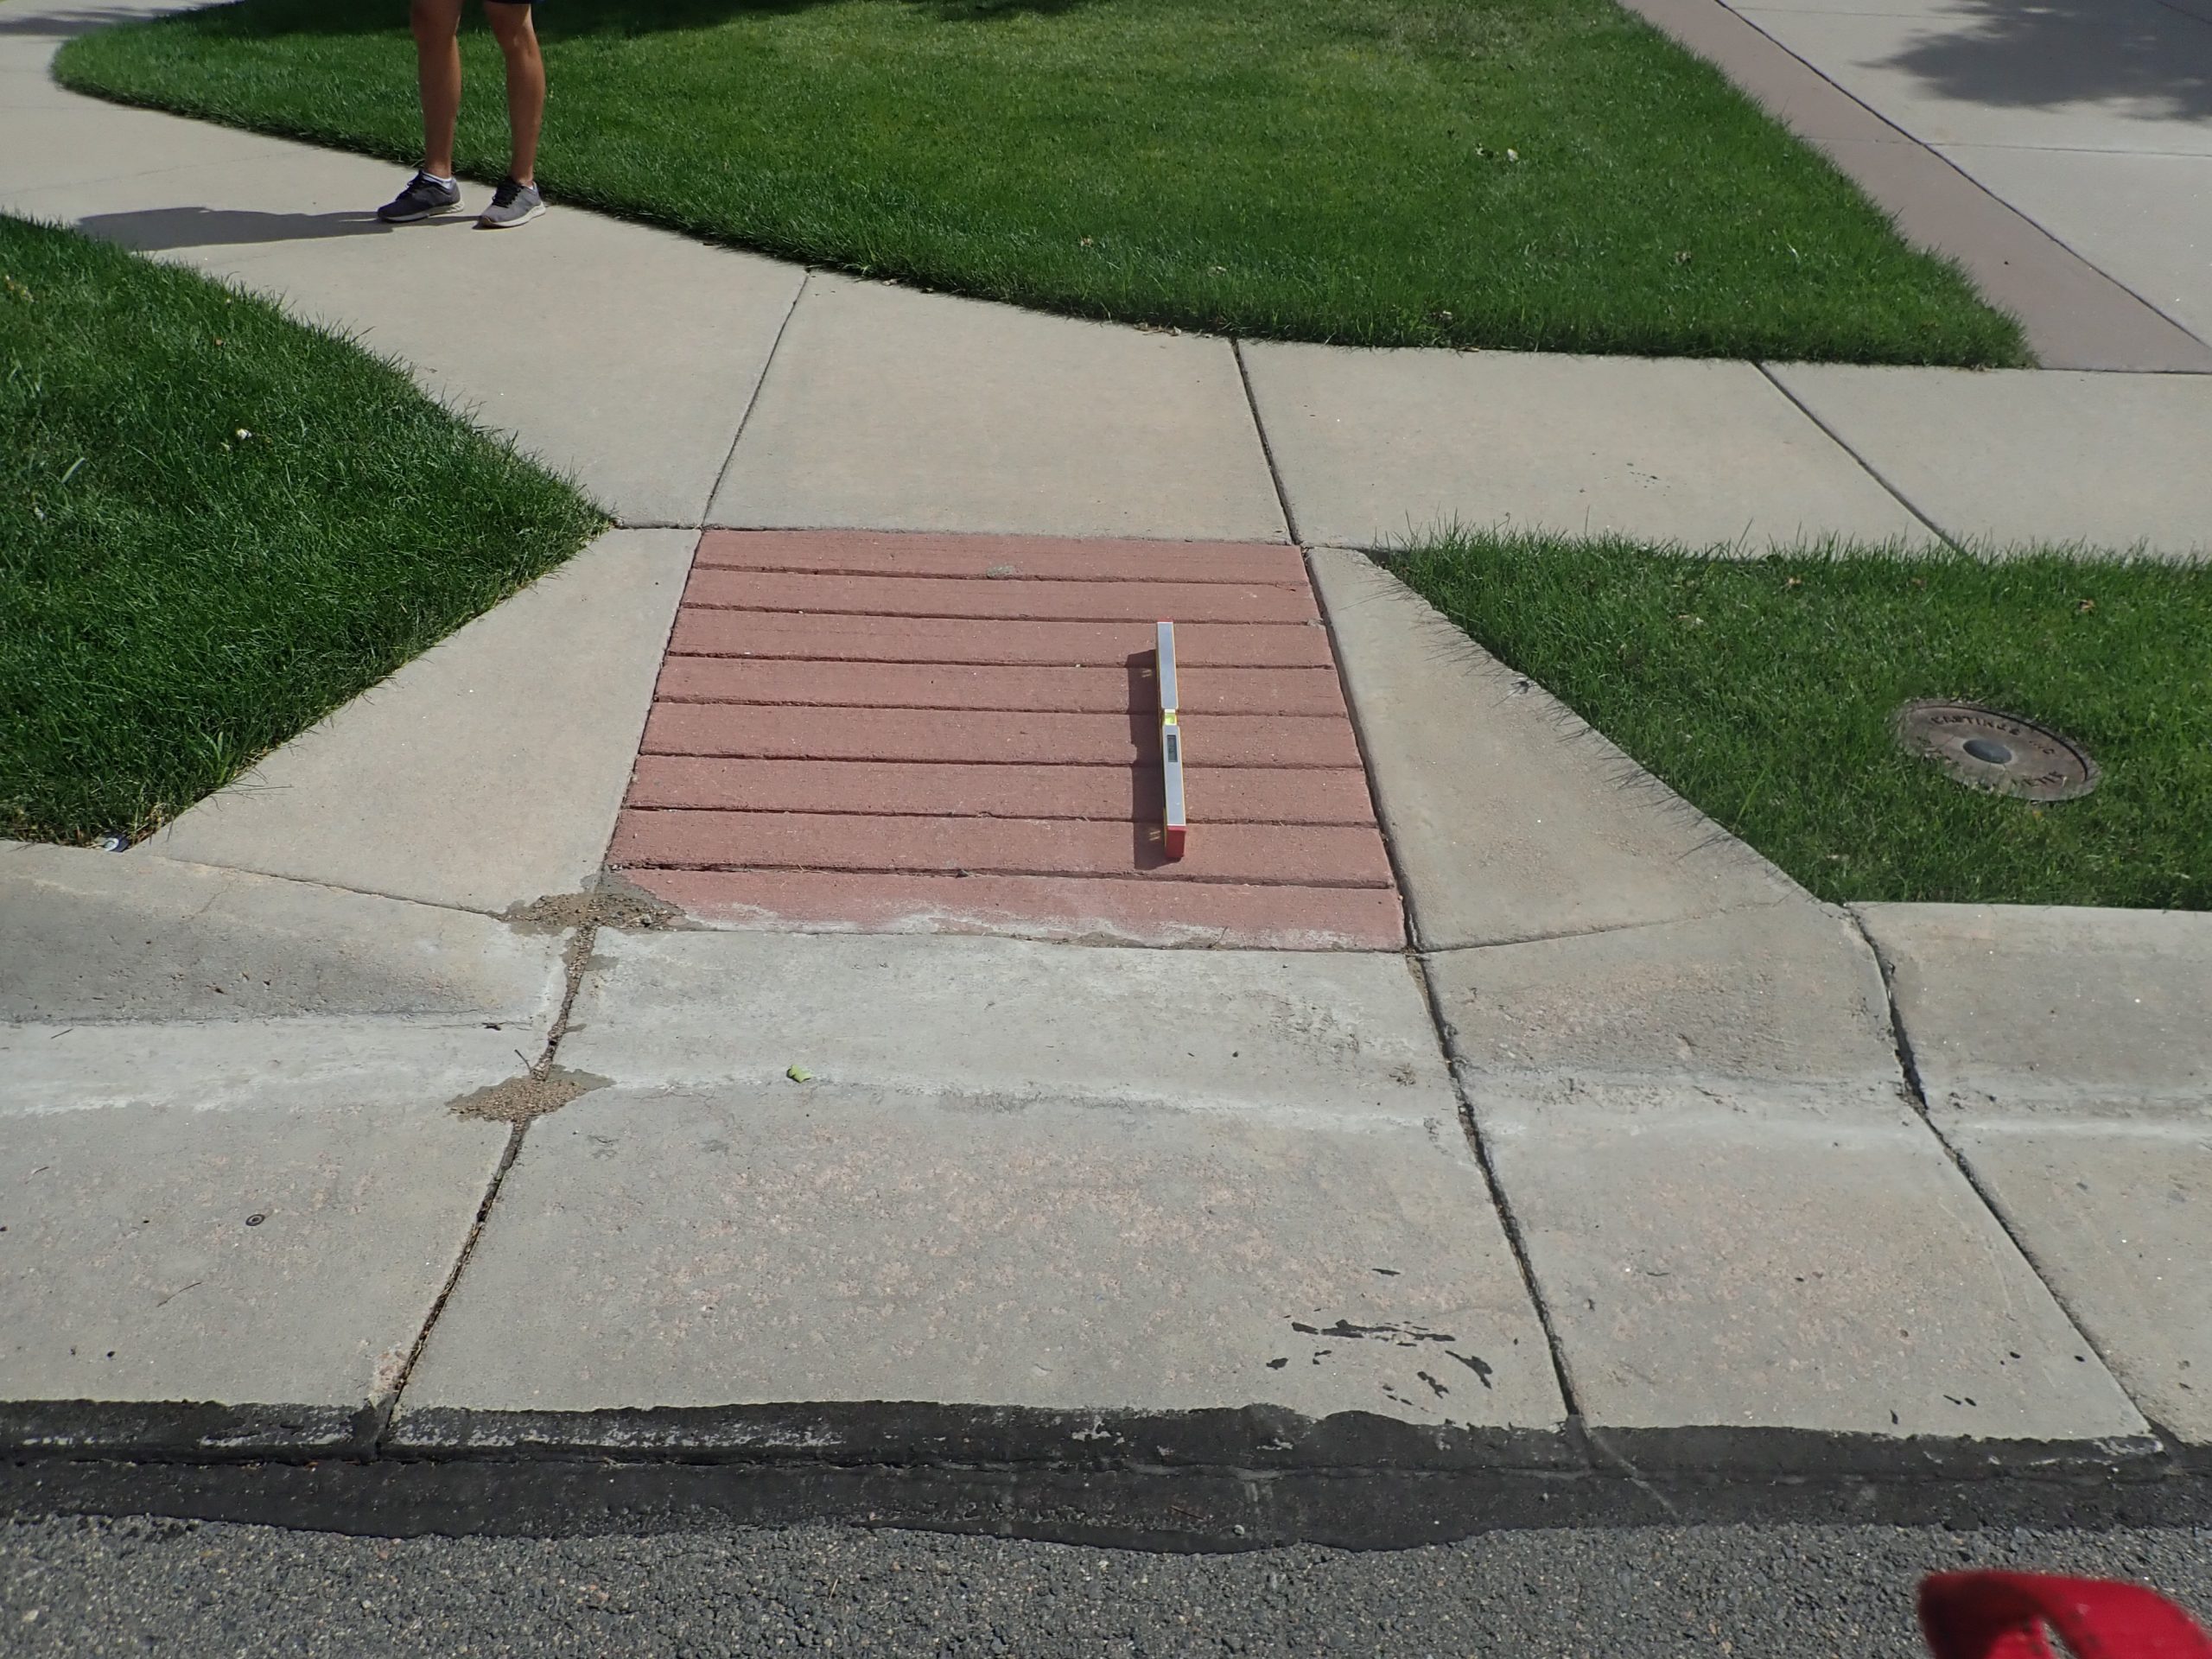 Level measuring the slope of a curb ramp